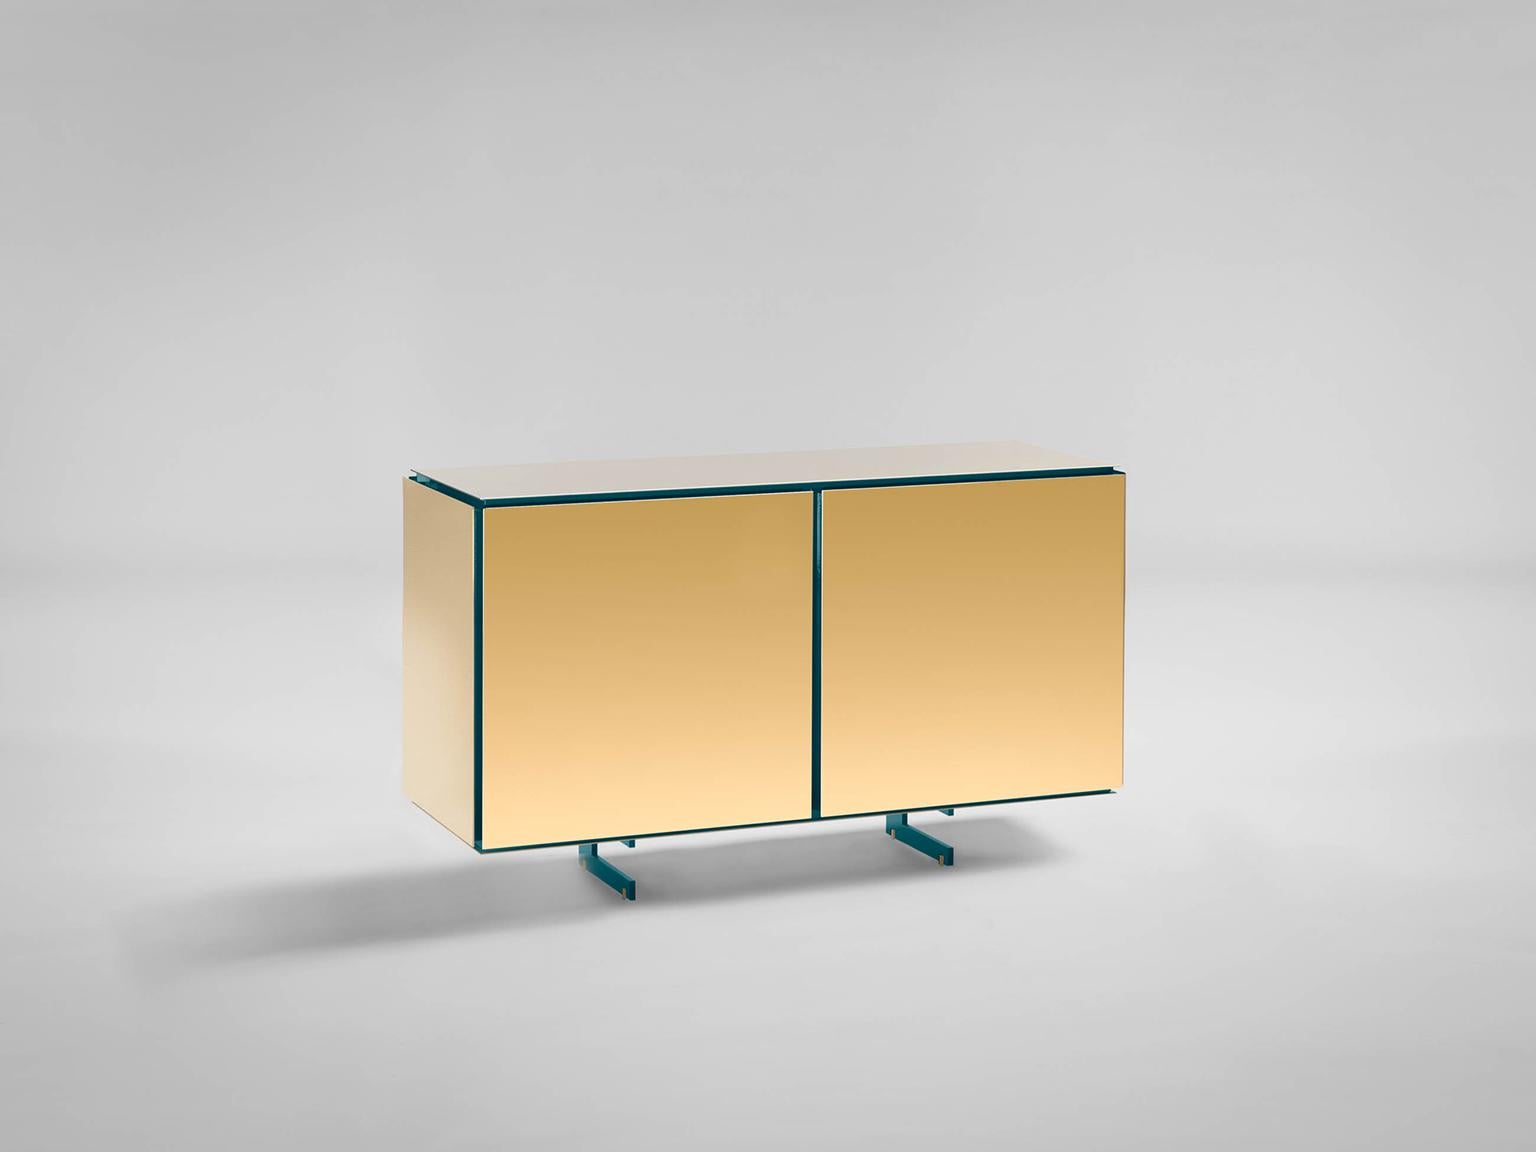 Sem Gold collection, two doors sideboard. Verdemare lacquered wooden structure, gloss finish. Available more colorway variants. External shell in 24-karat polished yellow gold plated combined with ultra-reflective steel. The Gold collection has a